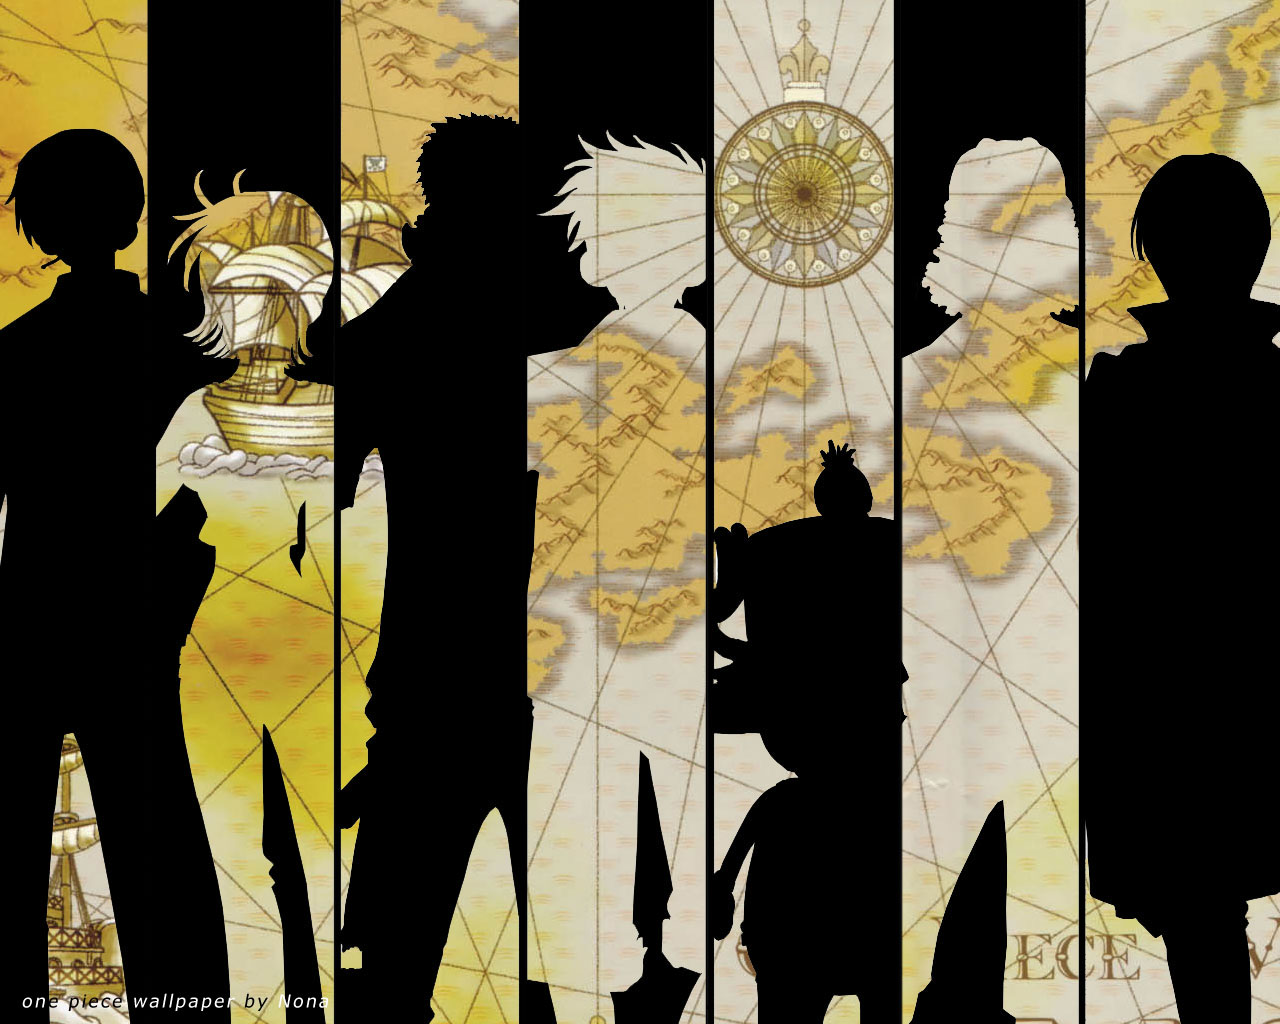 One Piece Wallpaper: find the grand line